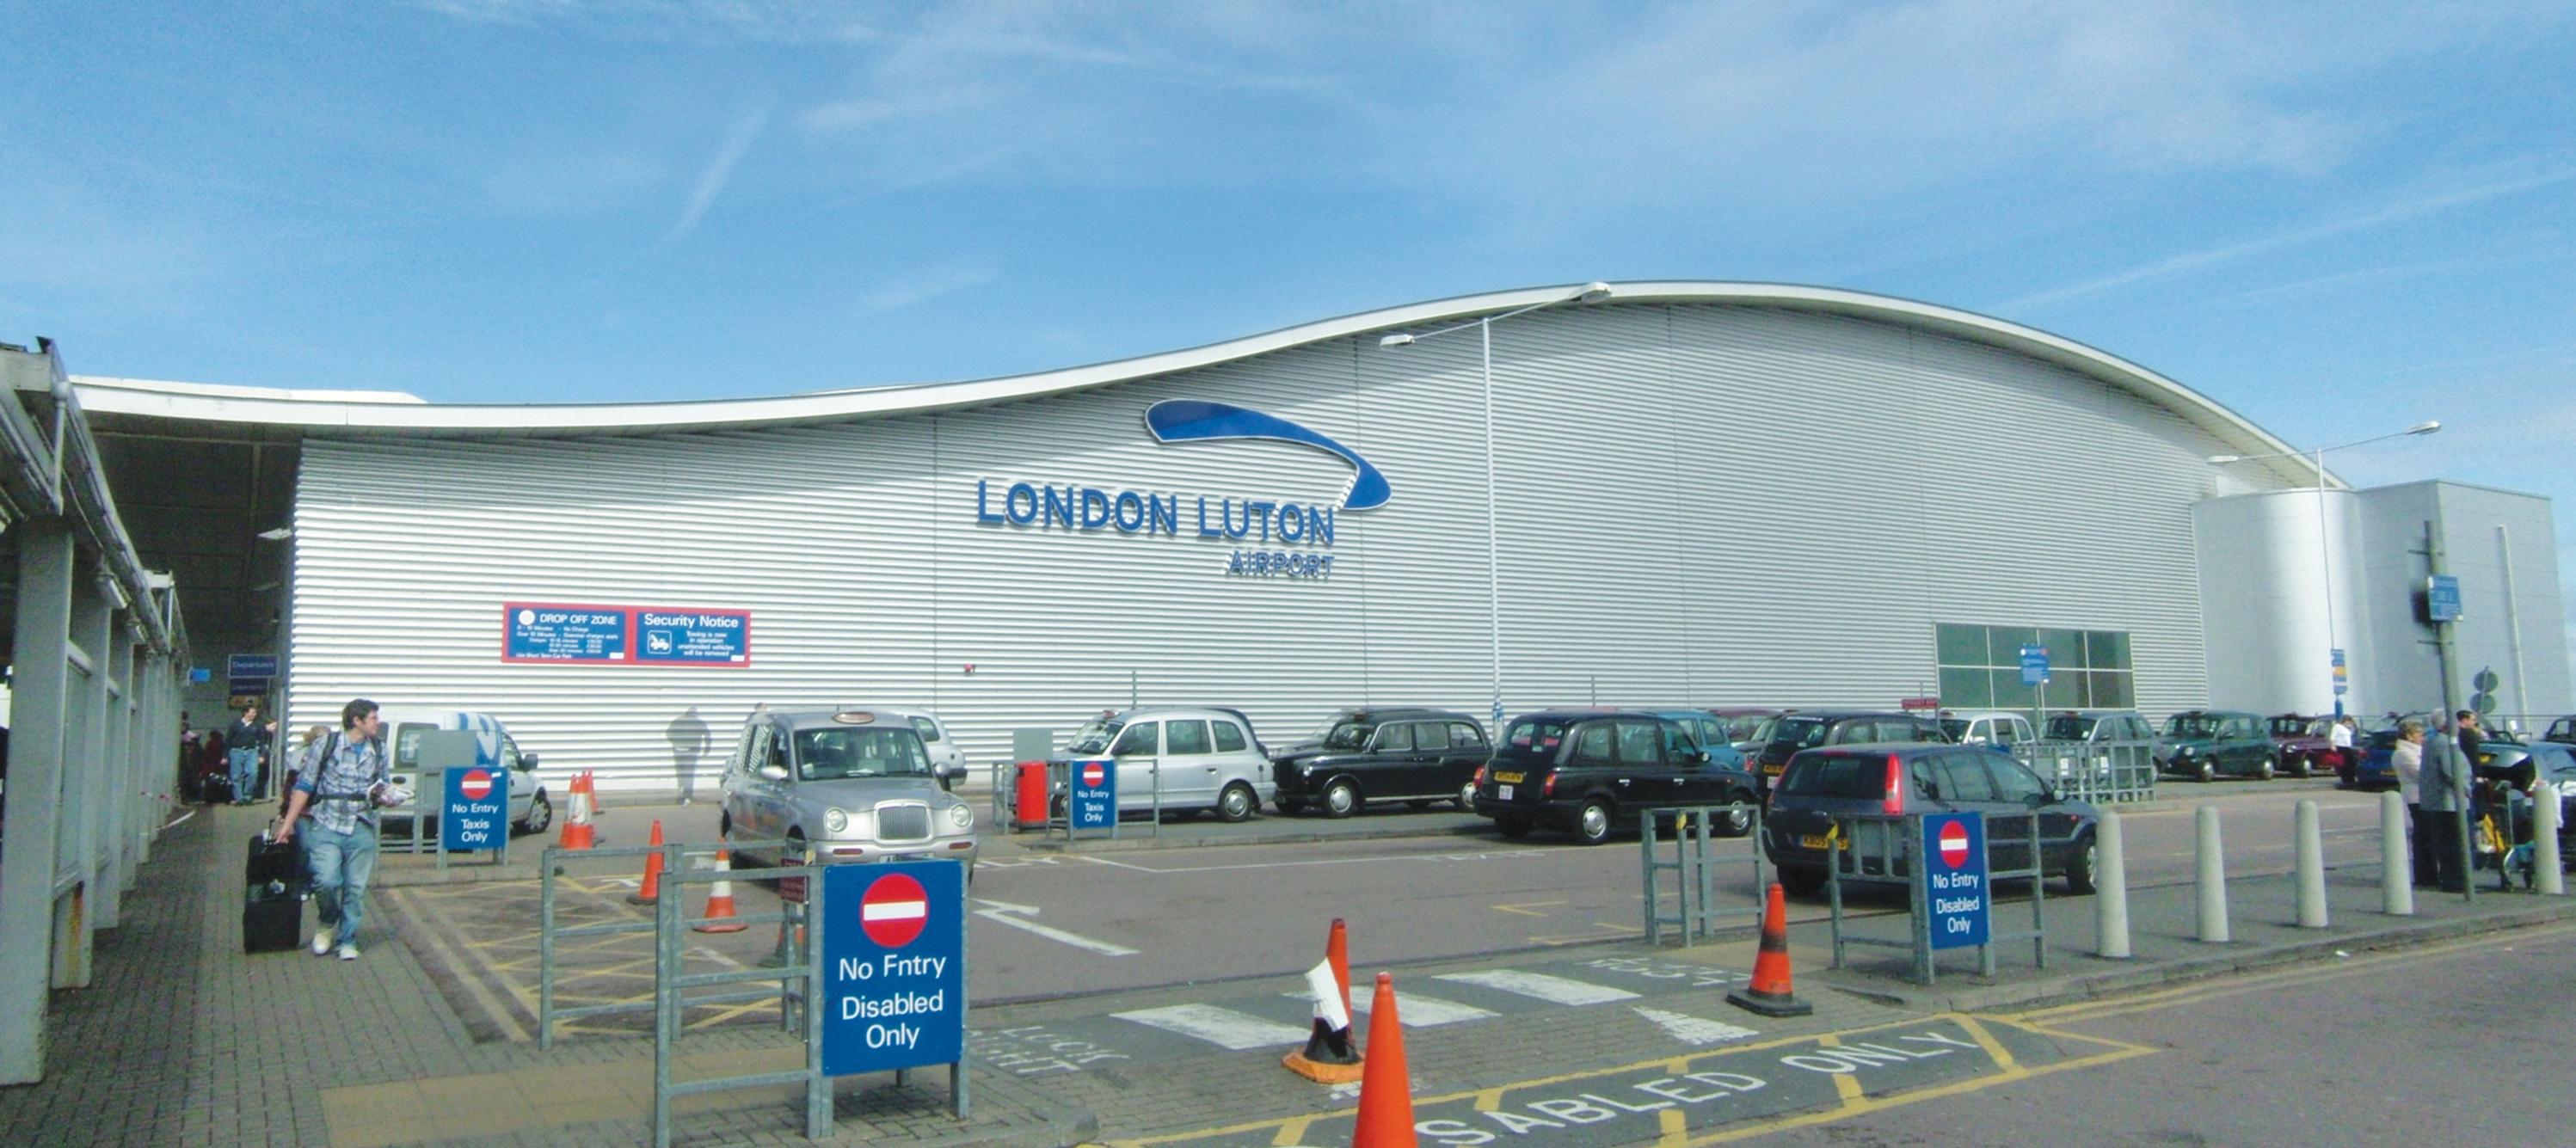 Luton Airport needs frequent non-stop rail services to London, says Nick Barton